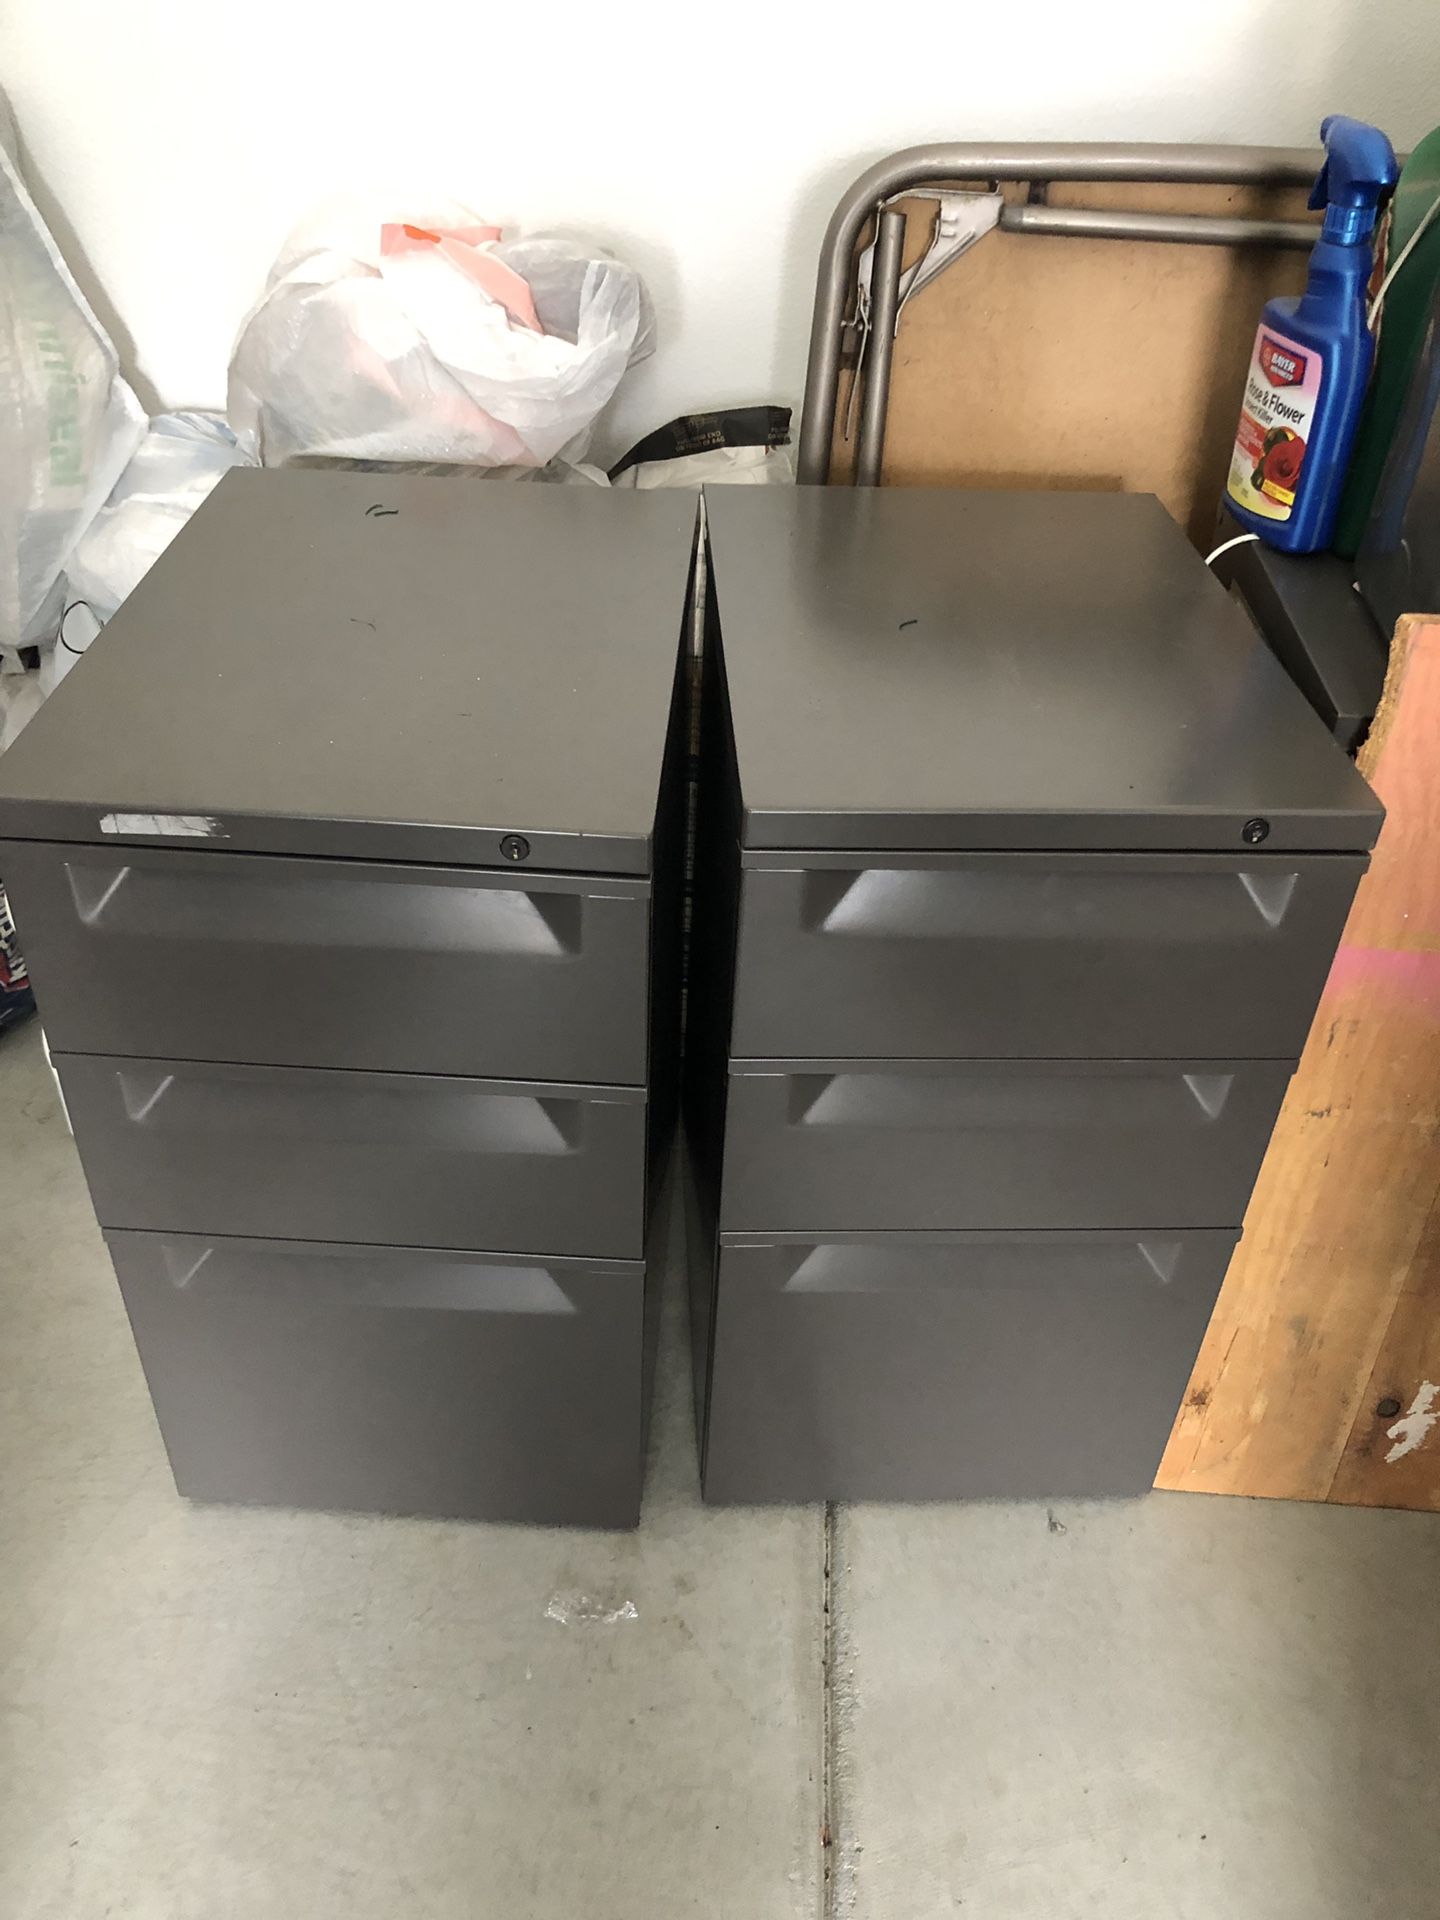 Excellent condition heavy duty file cabinets